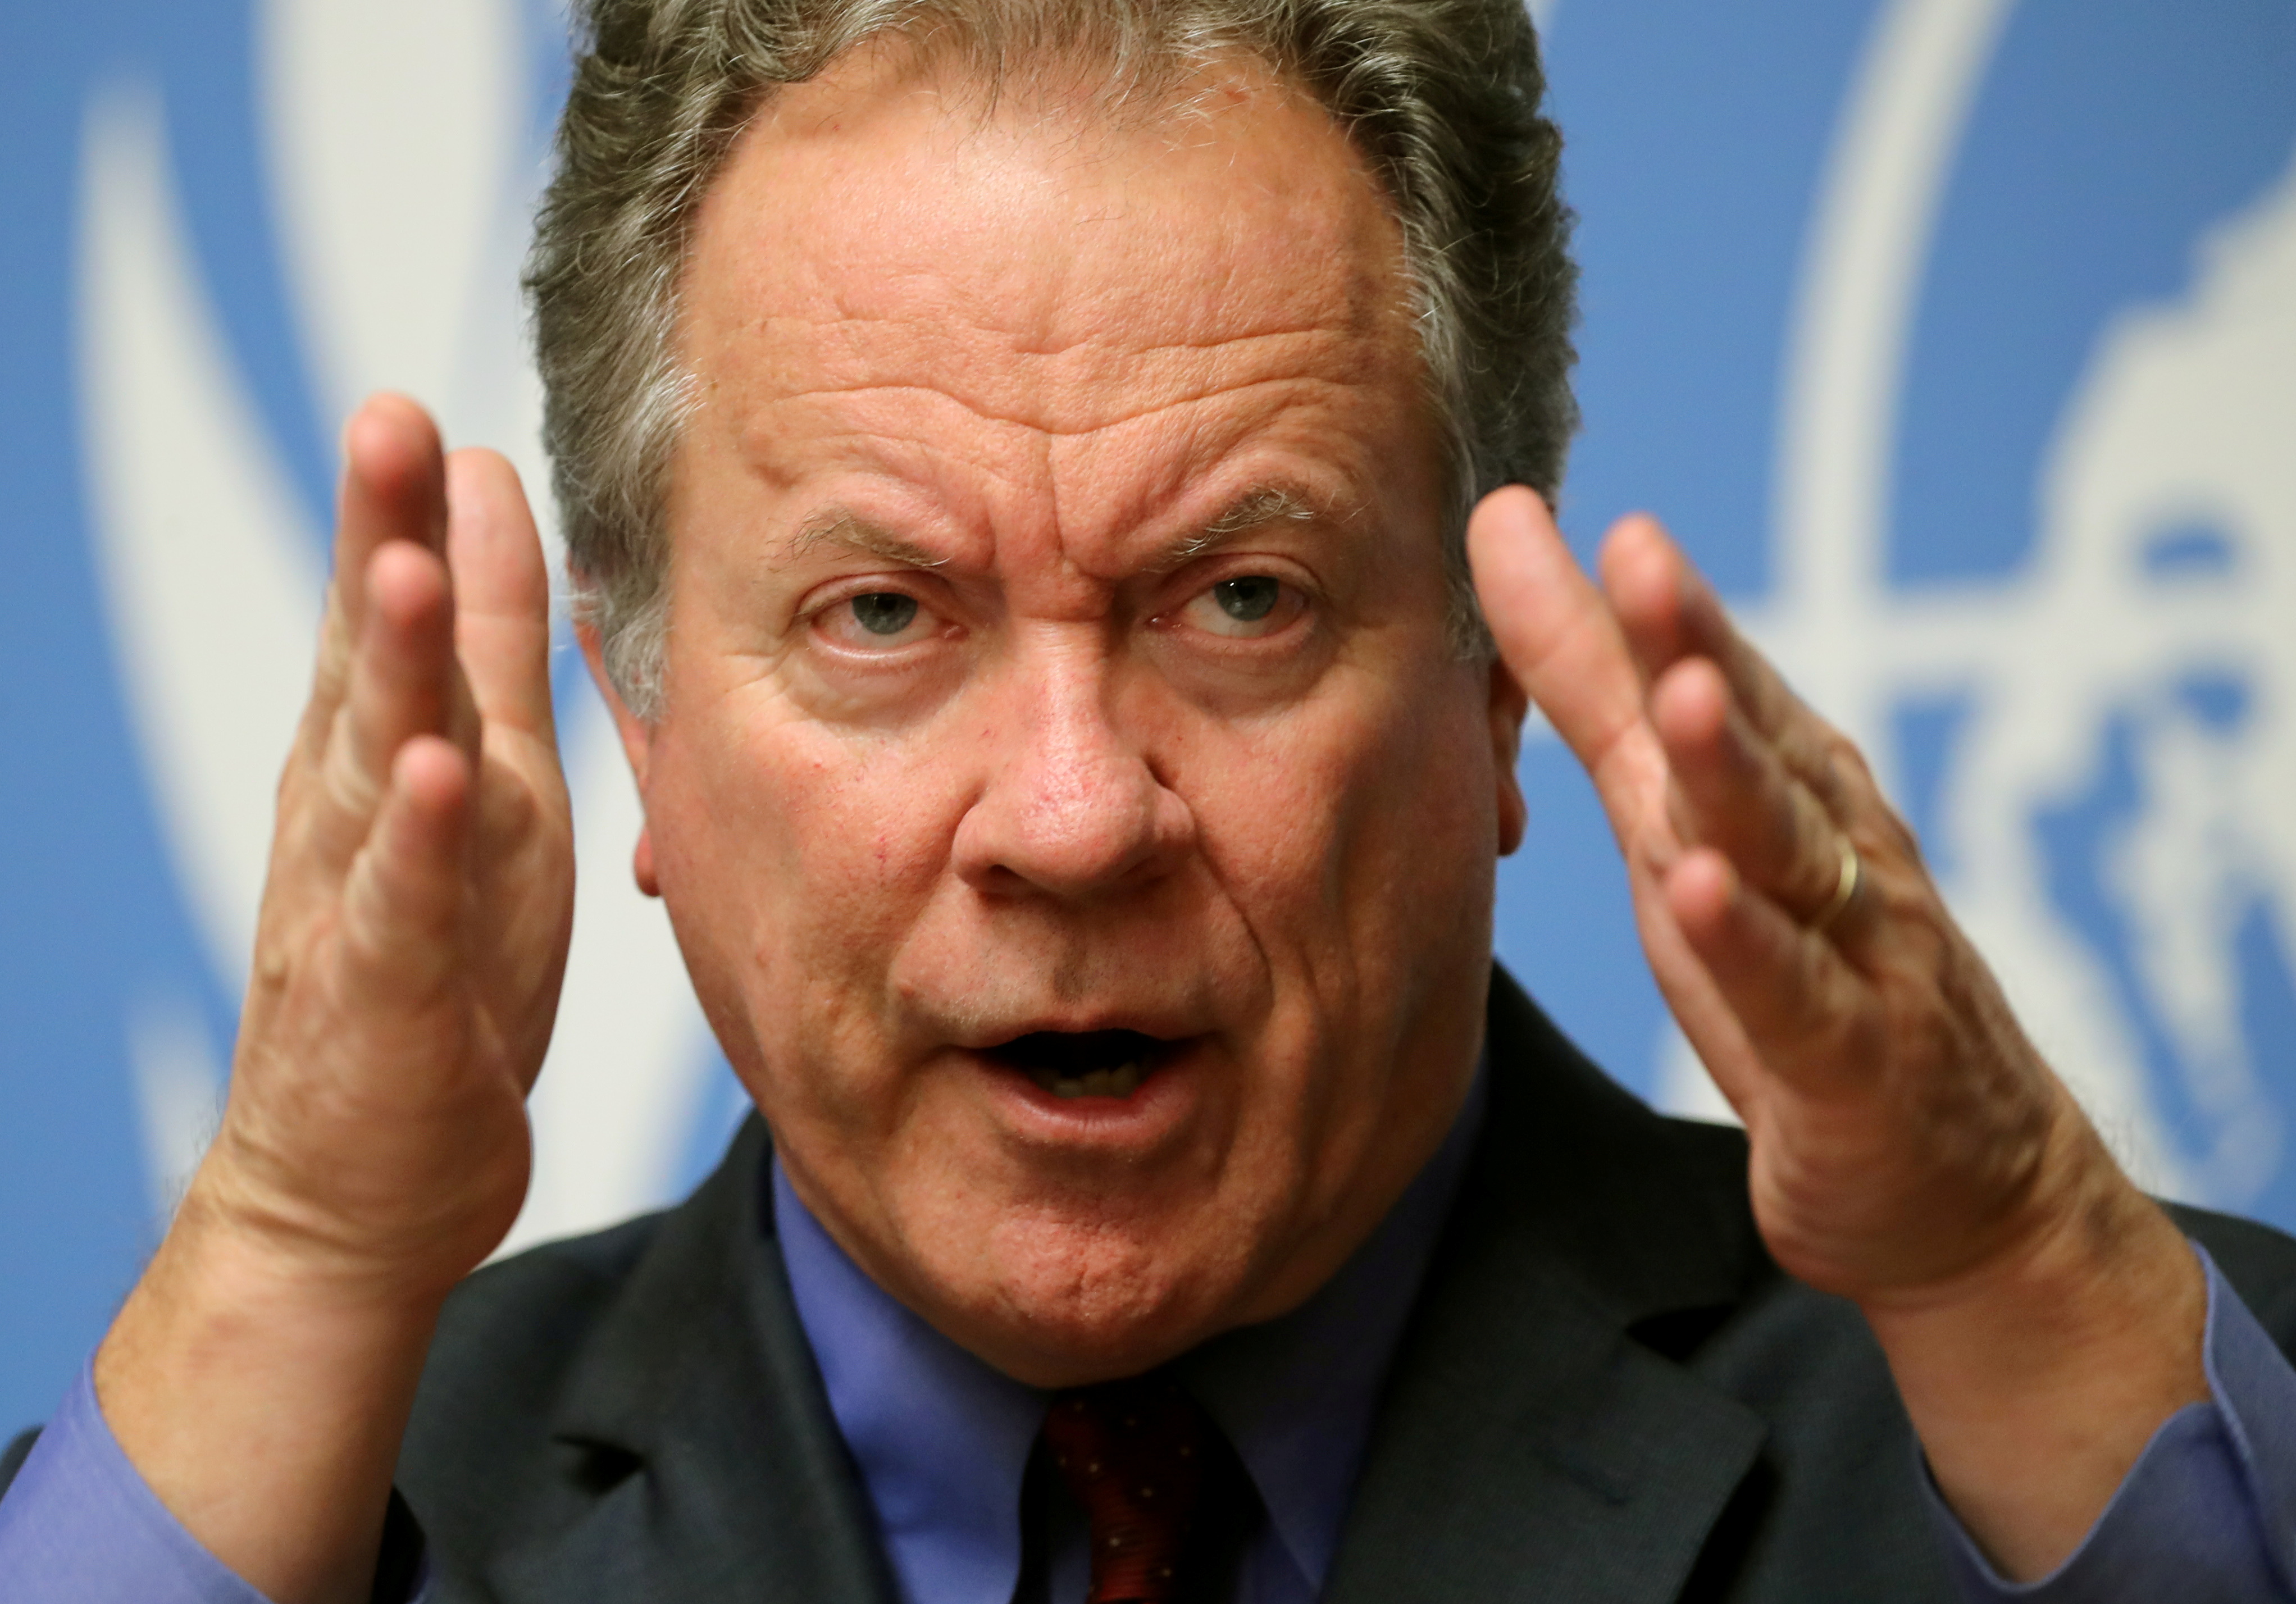 WFP Executive director Beasley attends a news conference in Geneva